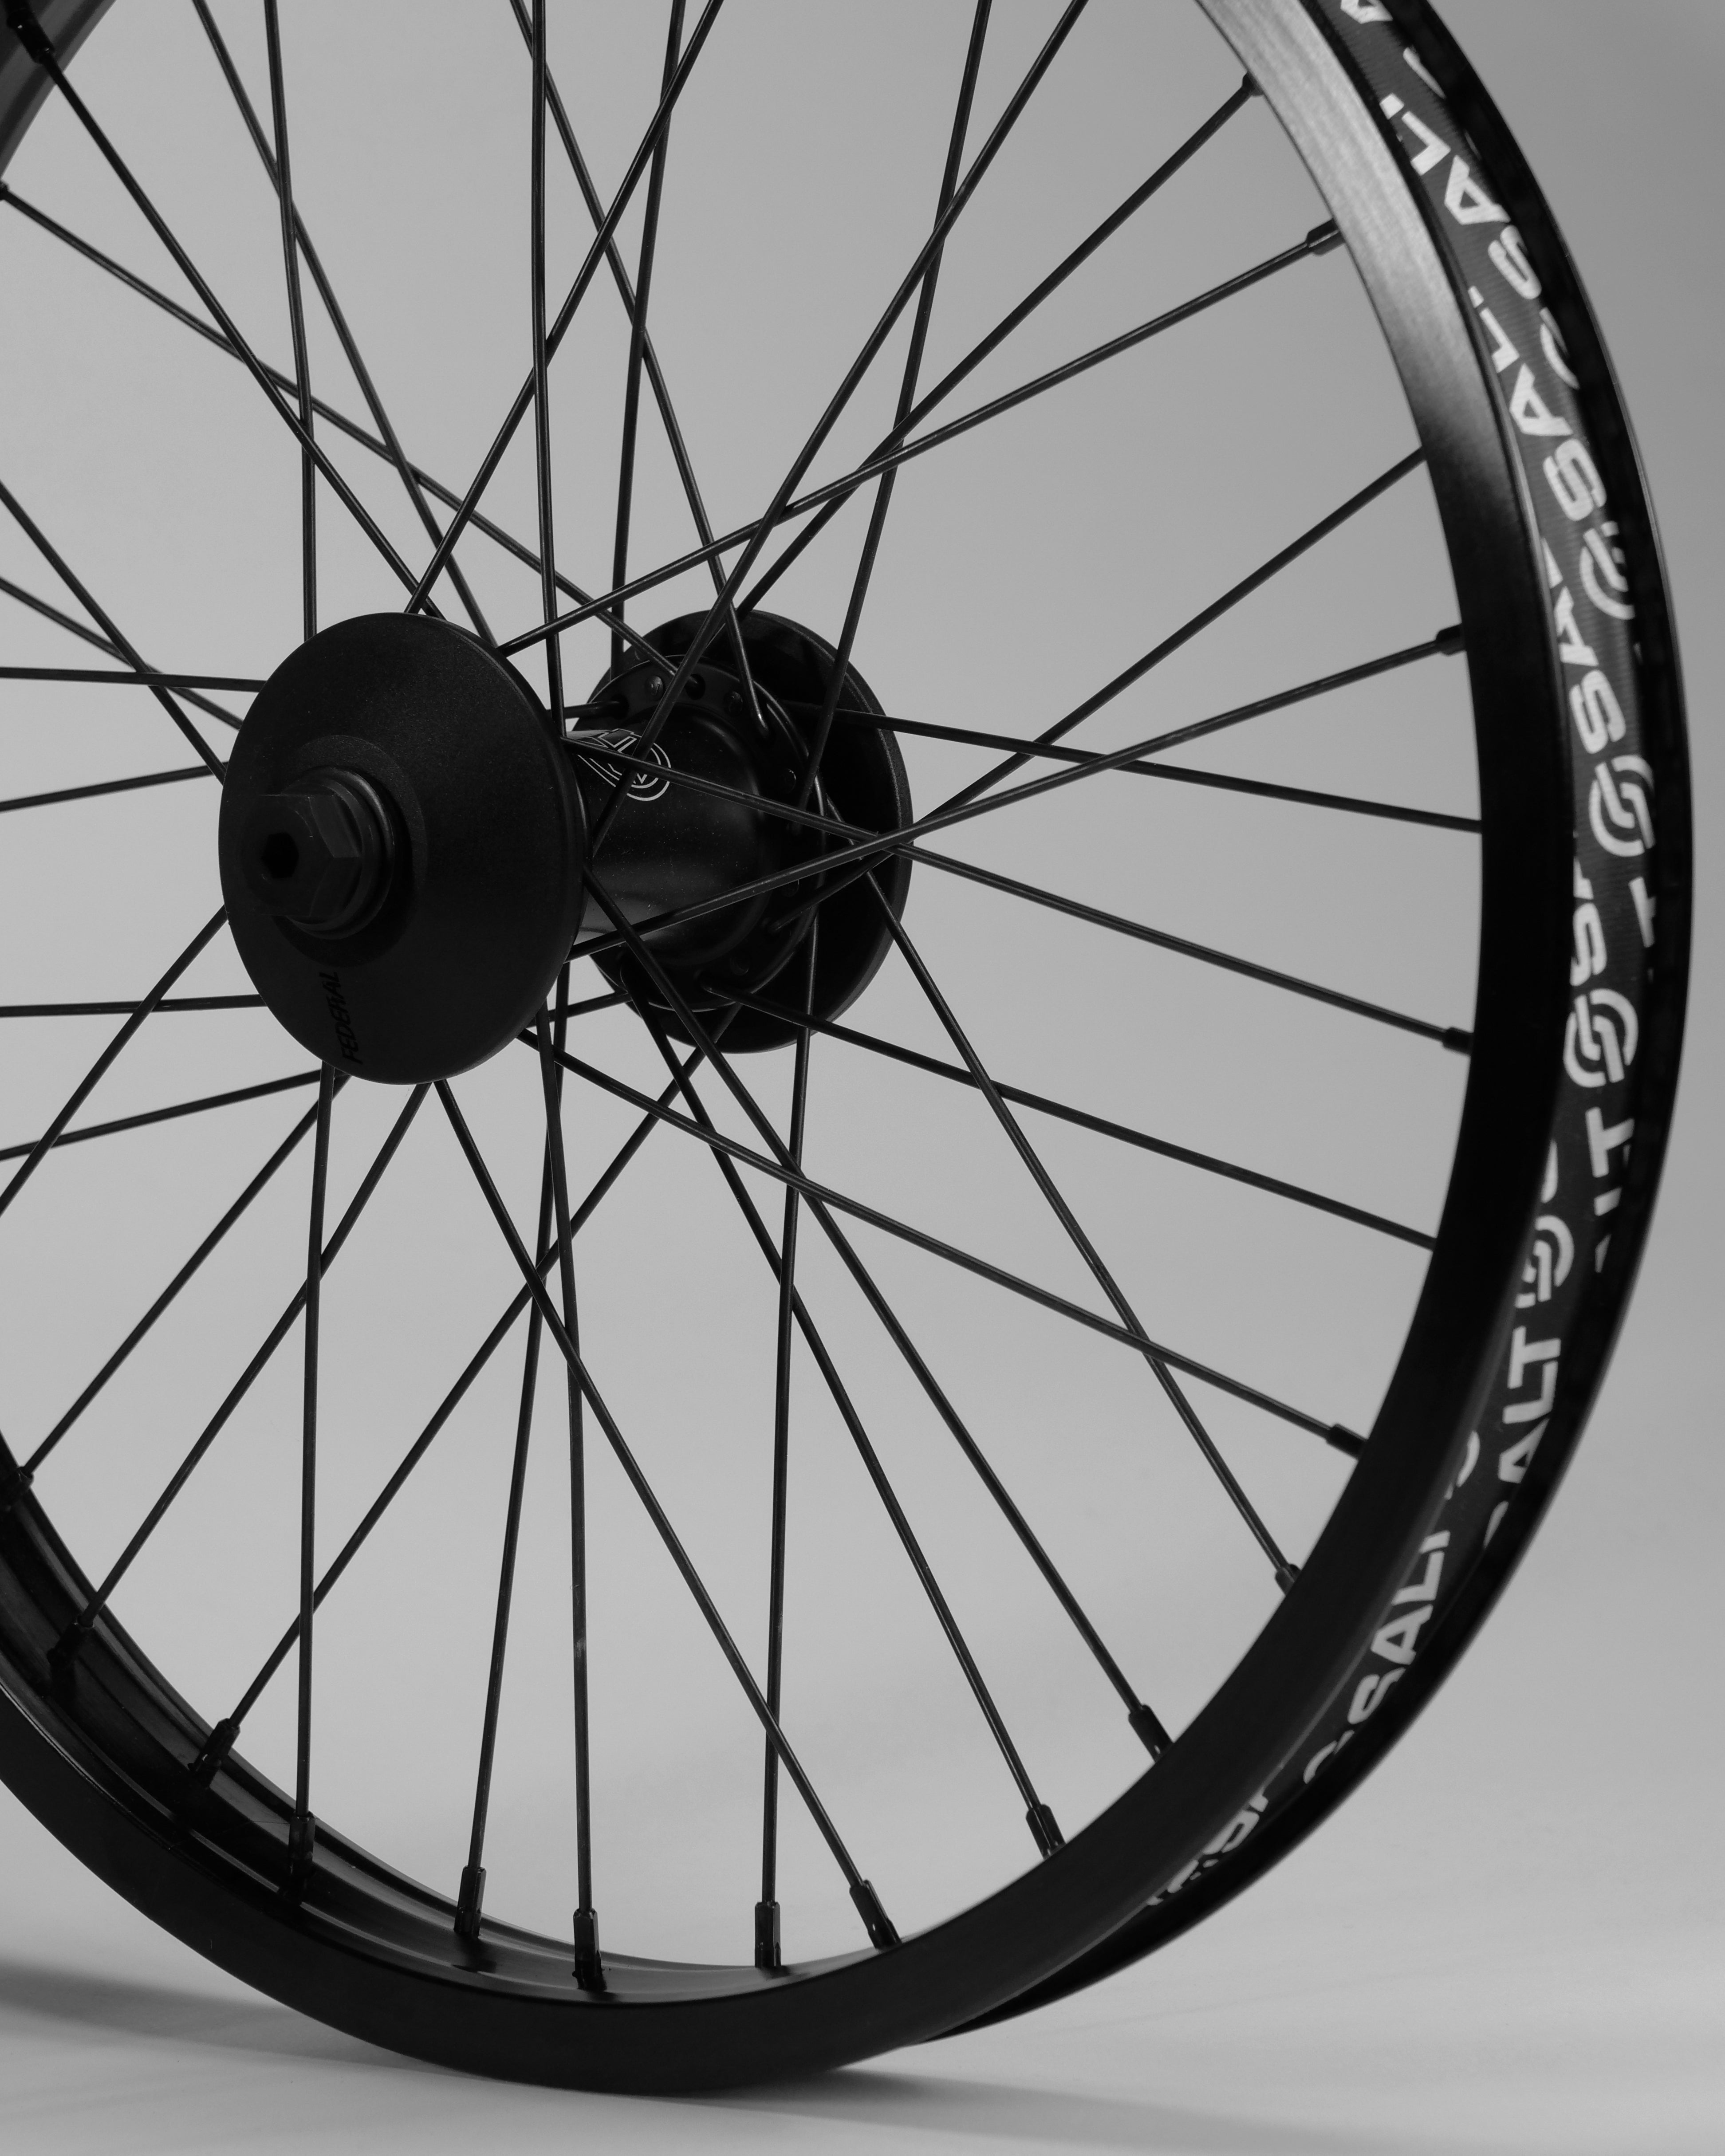 Close-up of a bicycle wheel with spokes, showing detailed view of the Federal Stance Pro x Alienation 18 Custom Wheelset hubset and rim against a neutral background.